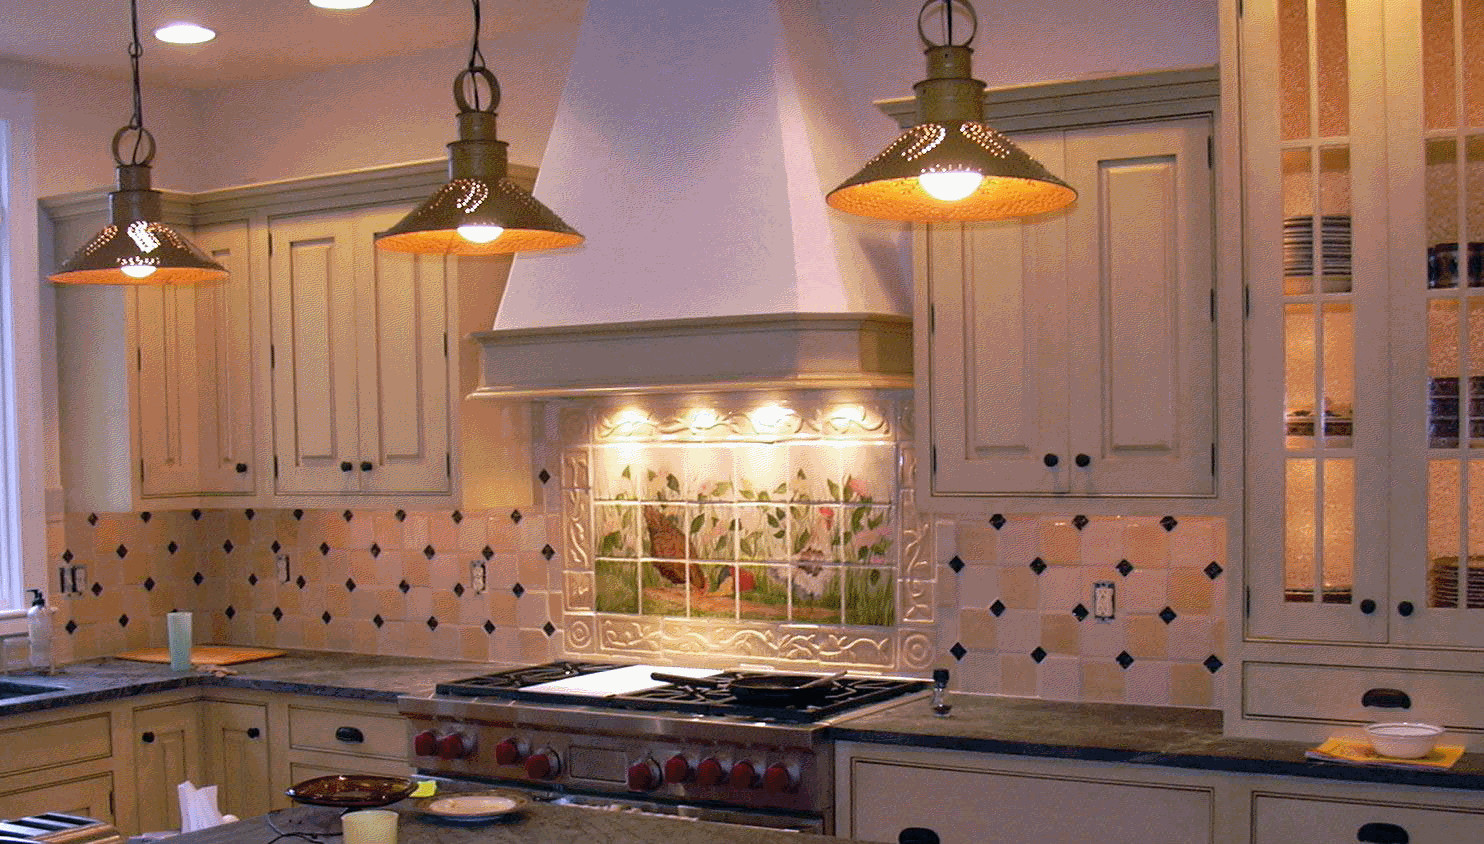 Kitchen Tiles Design
 301 Moved Permanently